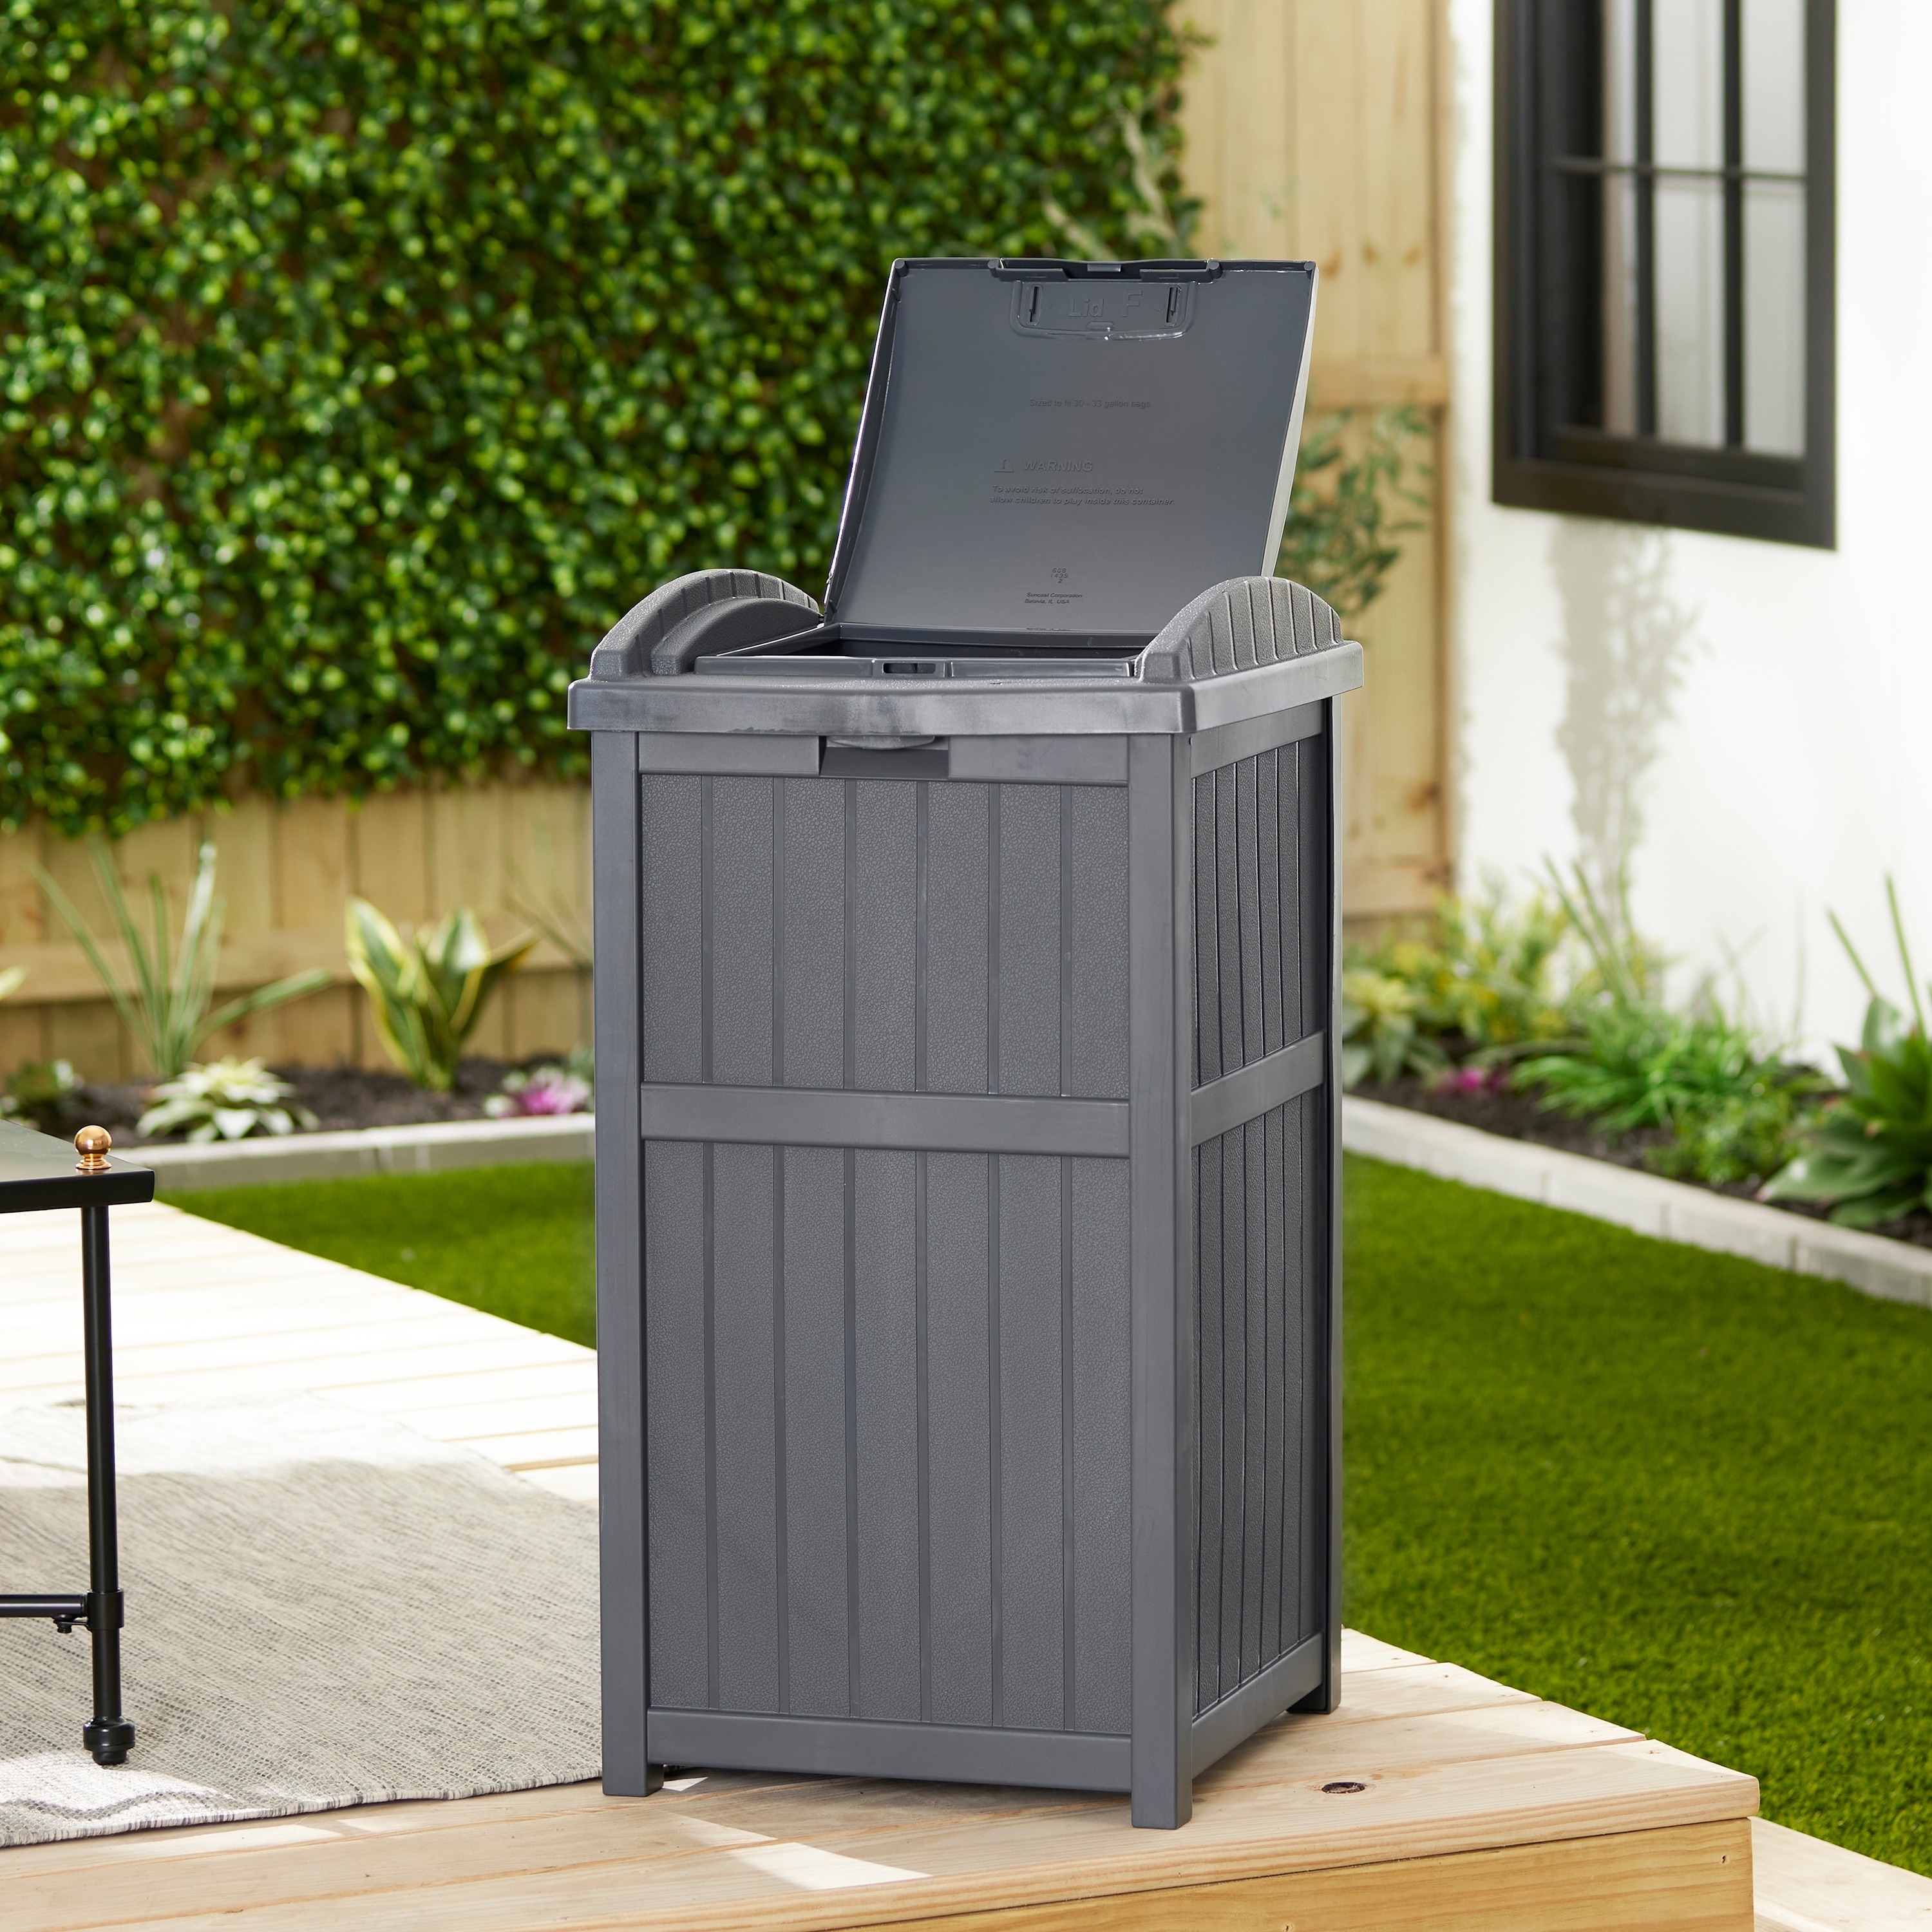 https://ak1.ostkcdn.com/images/products/is/images/direct/b78a8c485108bf46438758239b3e19b698bcc641/Suncast-Trashcan-Hideaway-Outdoor-33-Gallon-Garbage-Trash-Waste-Bin%2C-Cyberspace.jpg